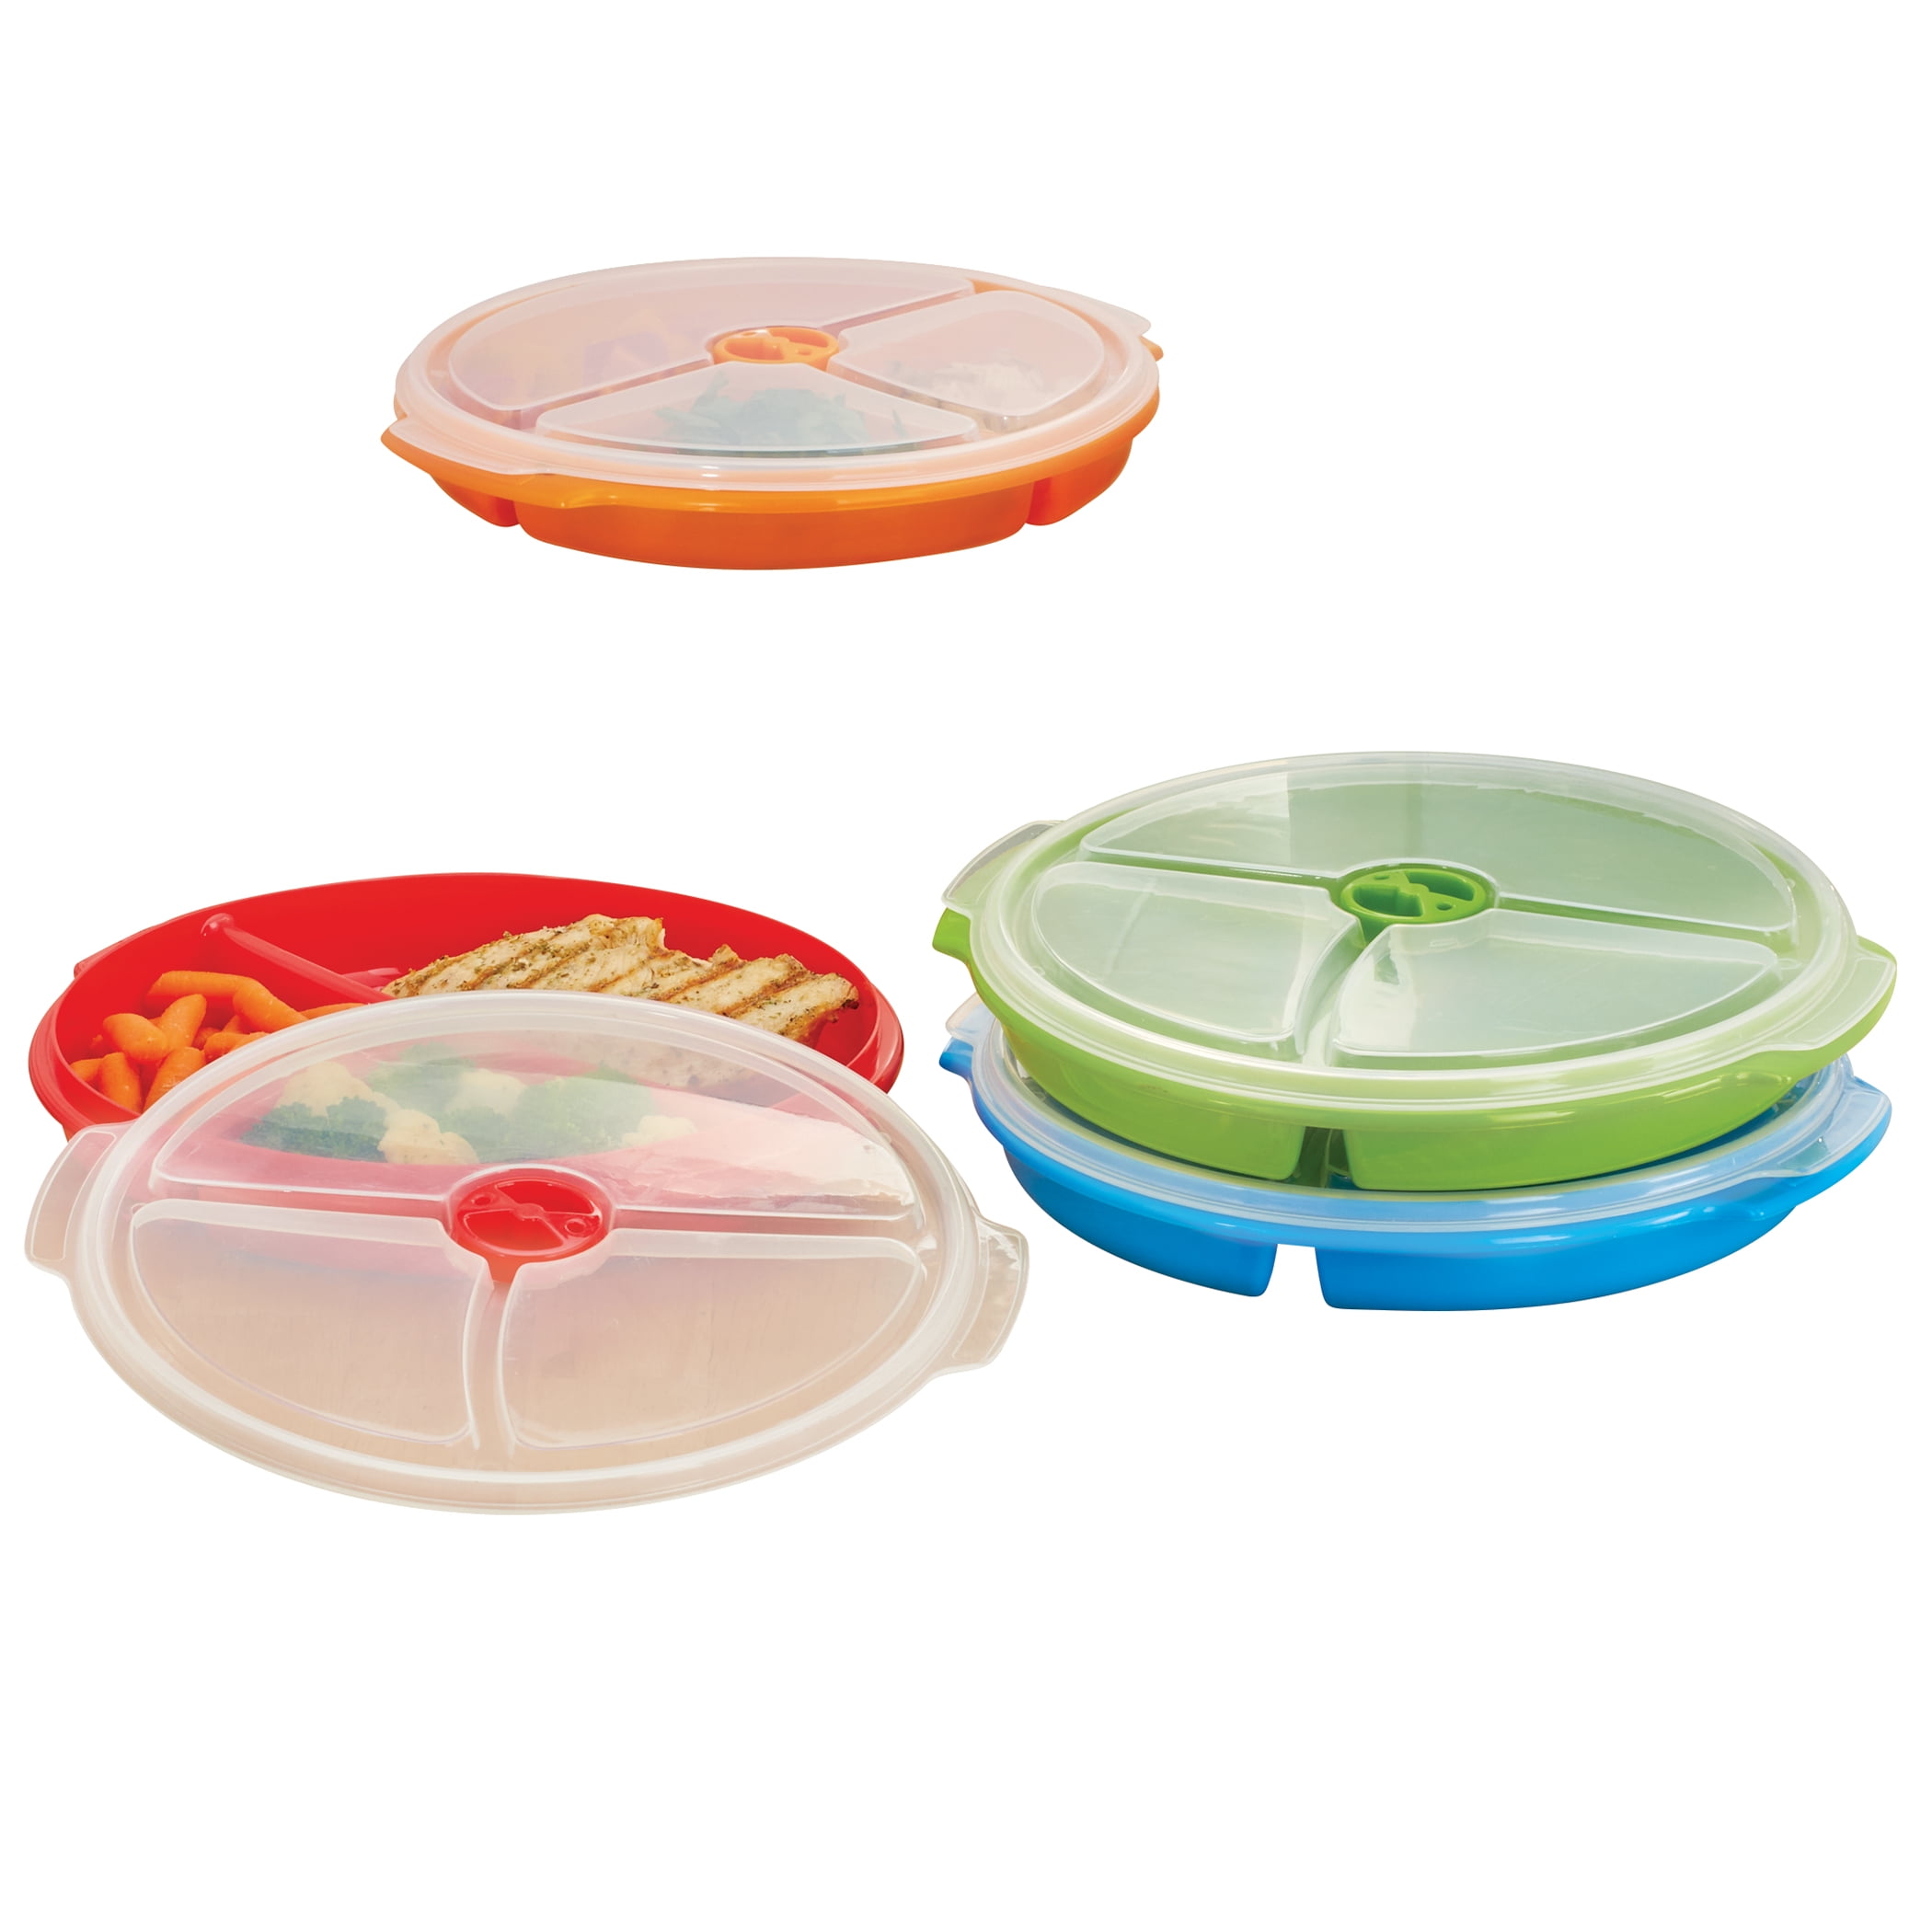 Miles Kimball Divided Plates And Food Storage Containers - Set Of 4